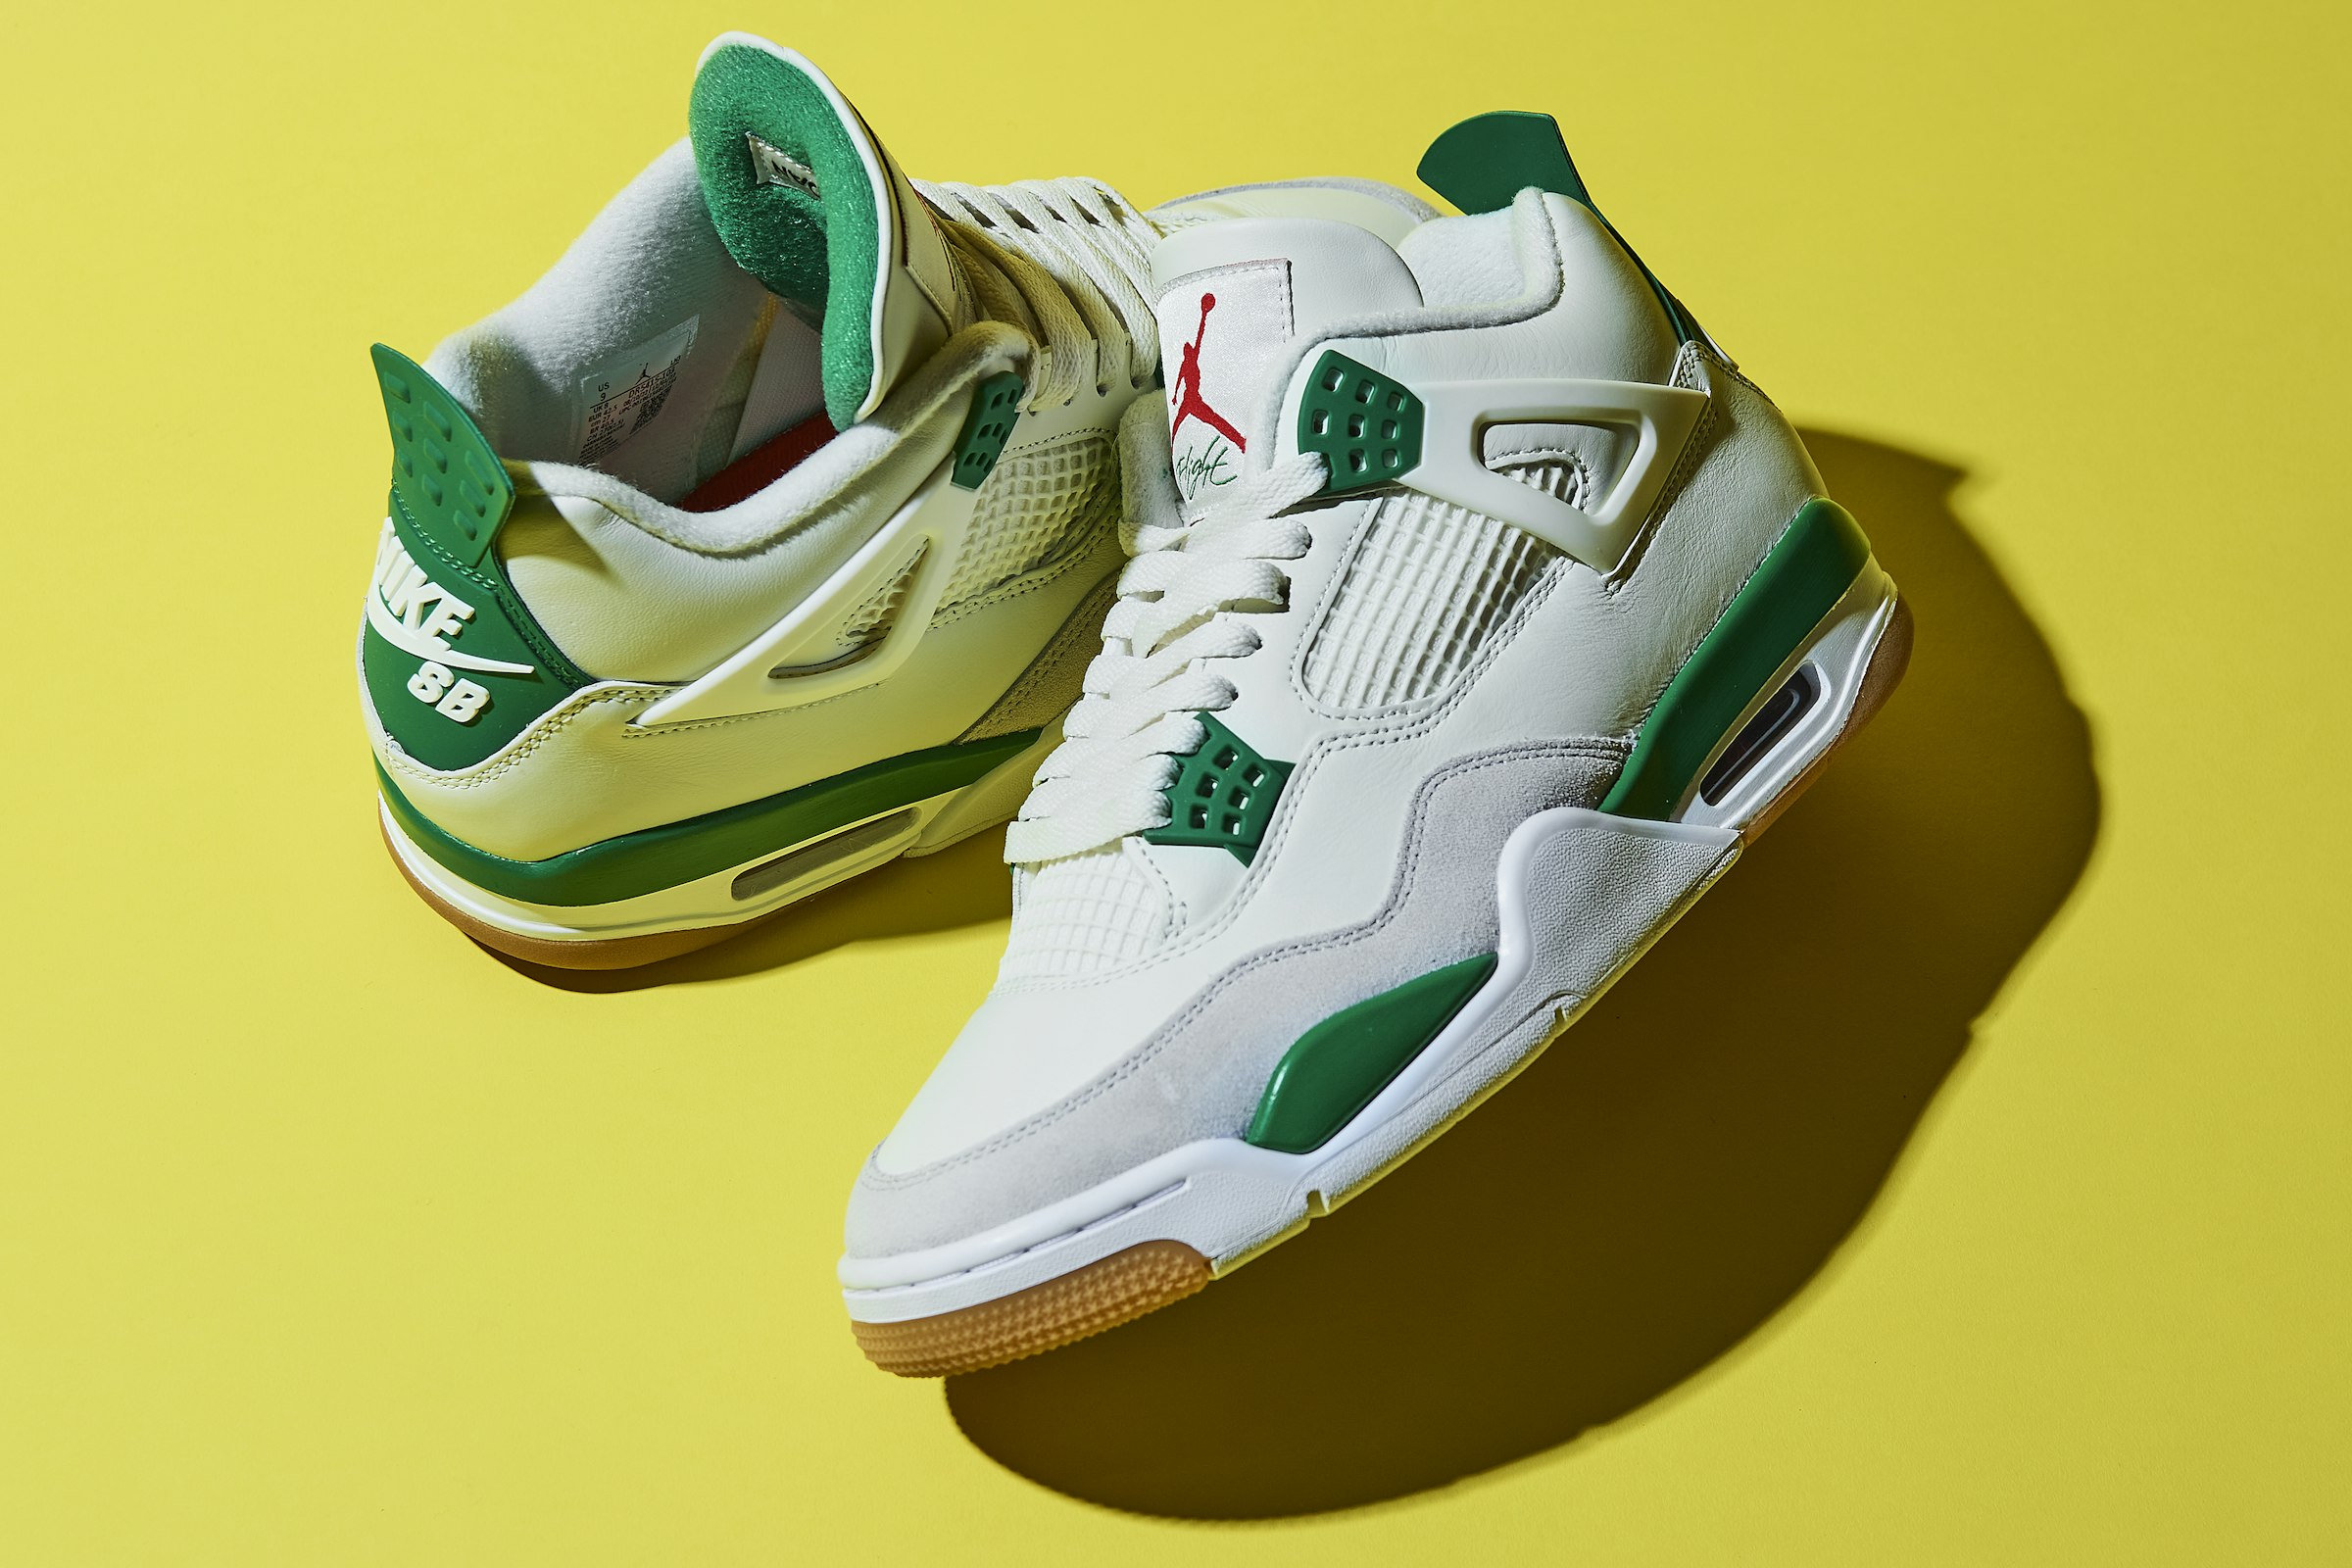 The popular series 'Air Jordan' leads to the collaboration 'NIKE SB' × 'Air Jordan 4' 'Pine Green'. A masterpiece accentuated with green